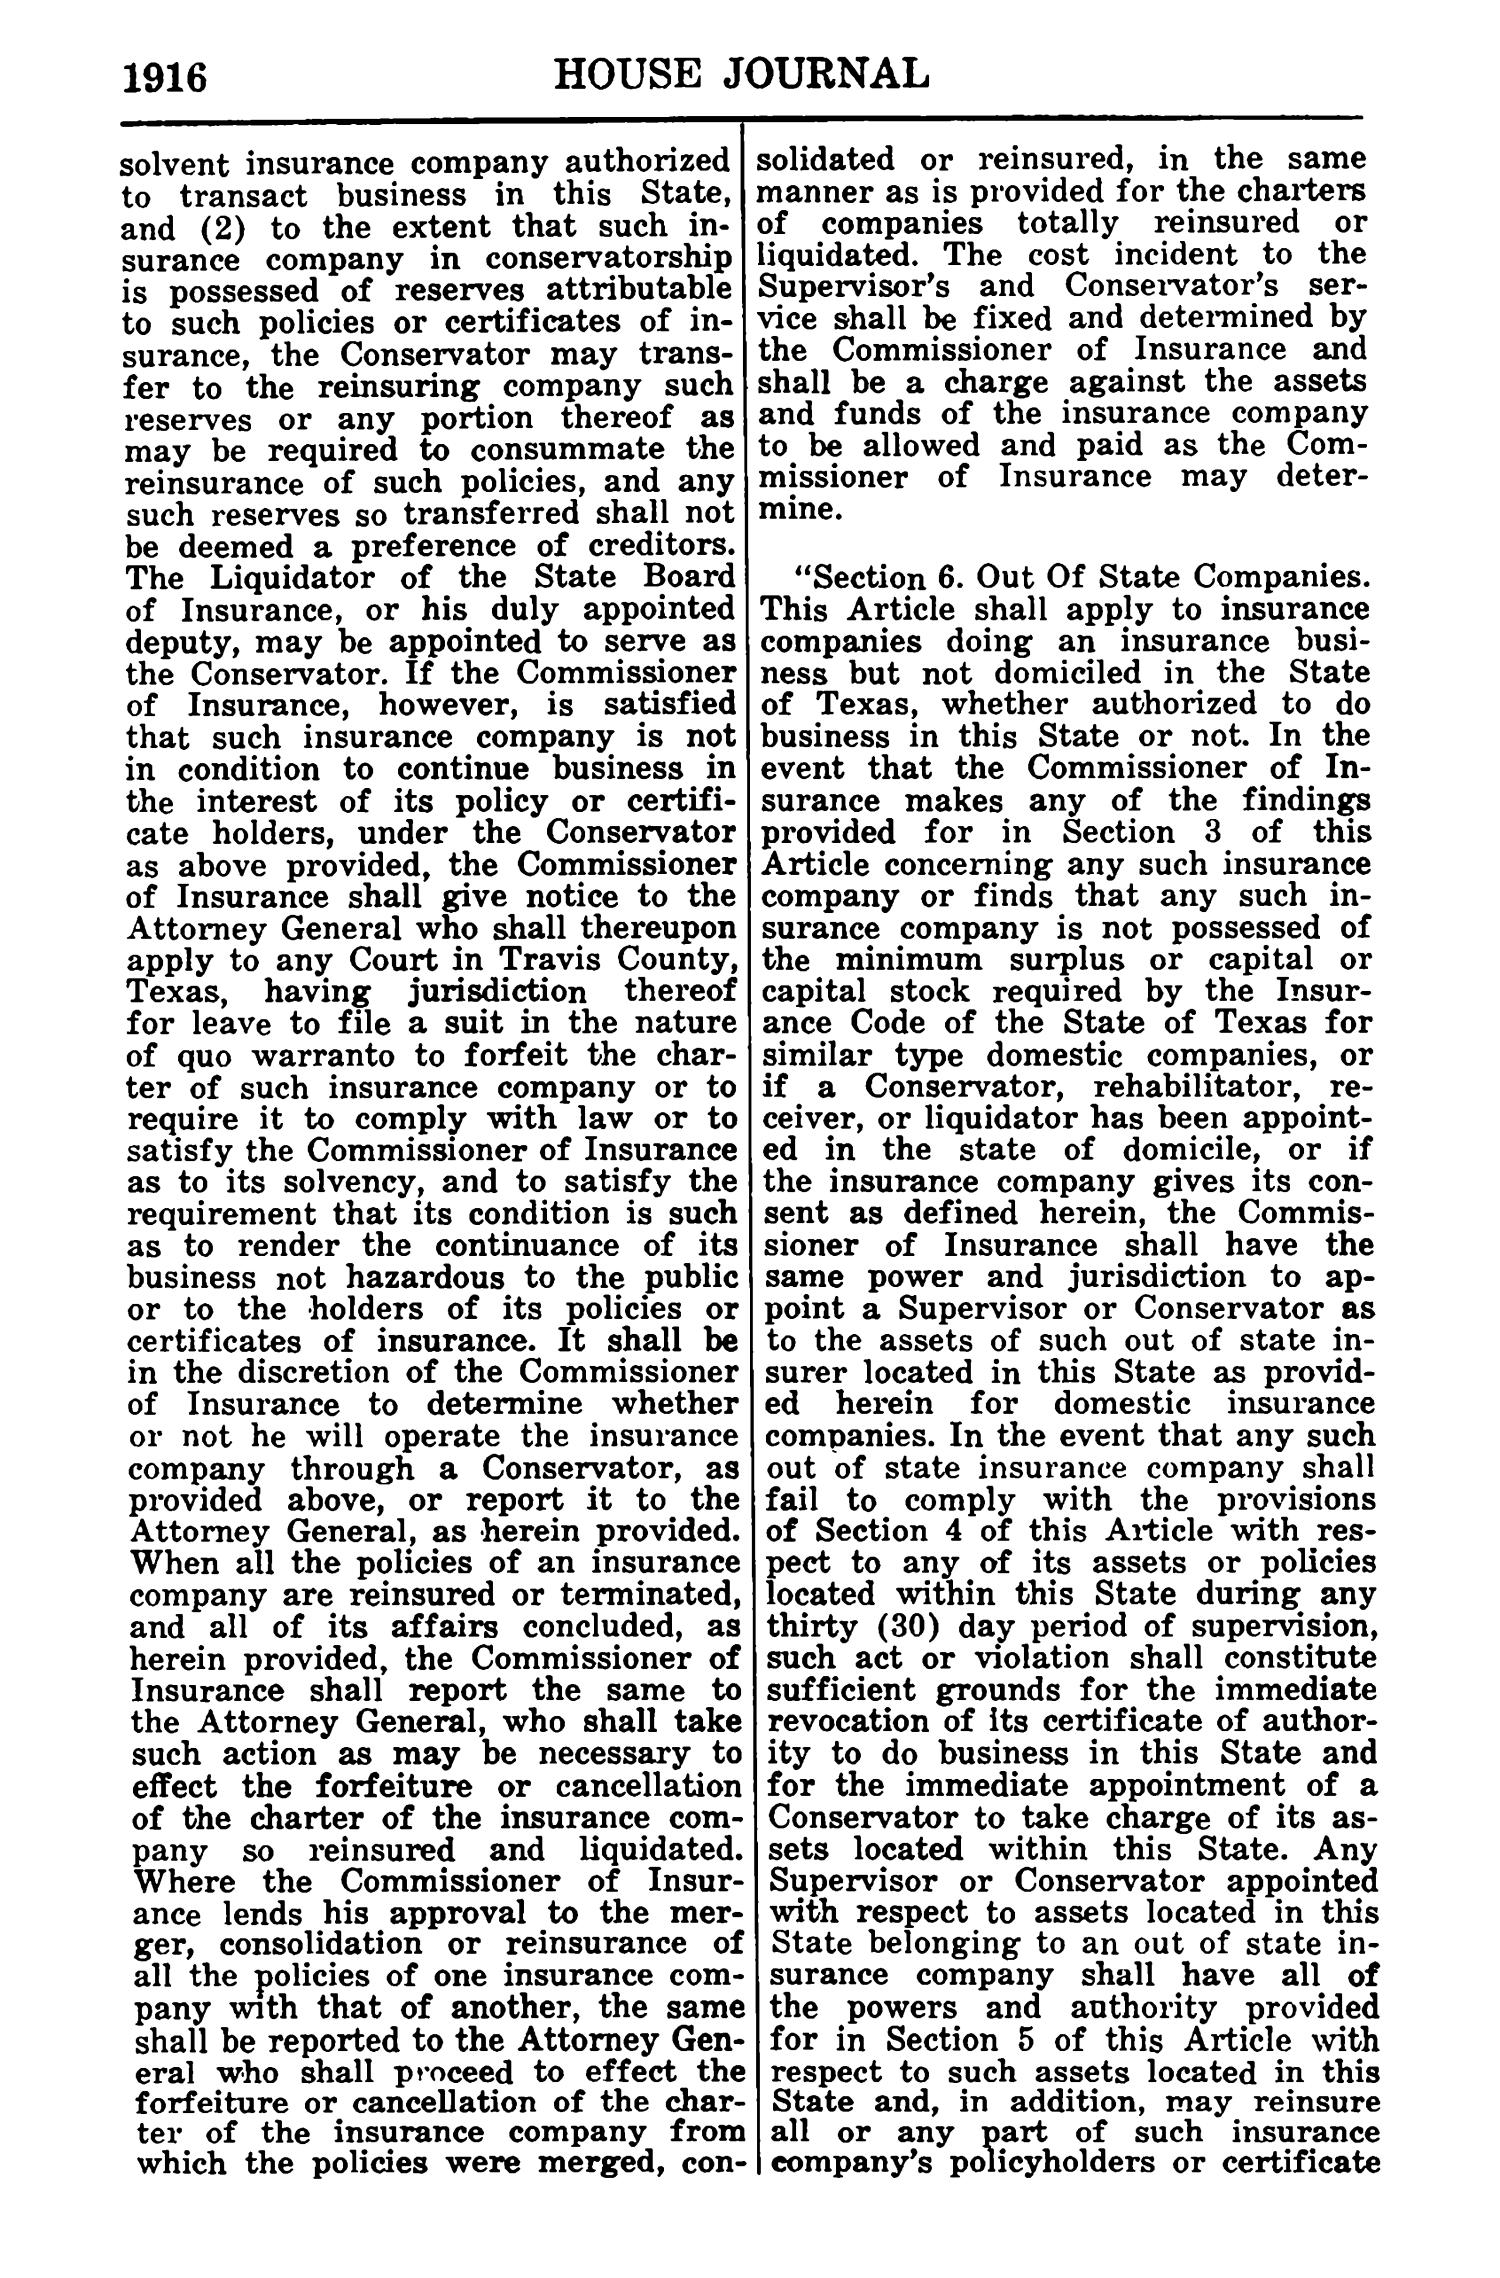 Journal of the House of Representatives of the Regular Session of the Sixtieth Legislature of the State of Texas, Volume 1
                                                
                                                    1916
                                                